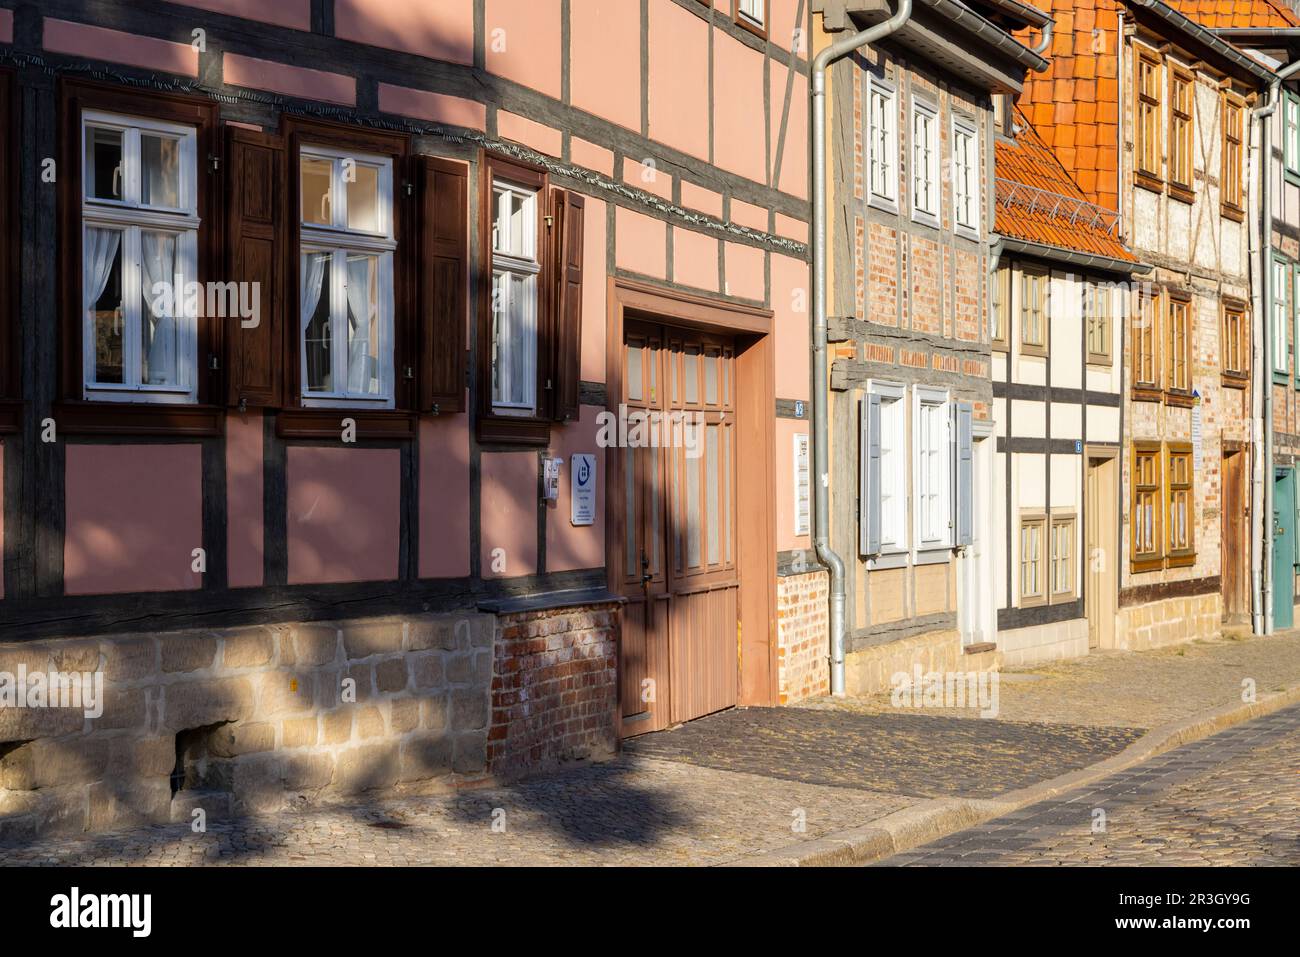 Historical old town of Quedlinburg Stock Photo